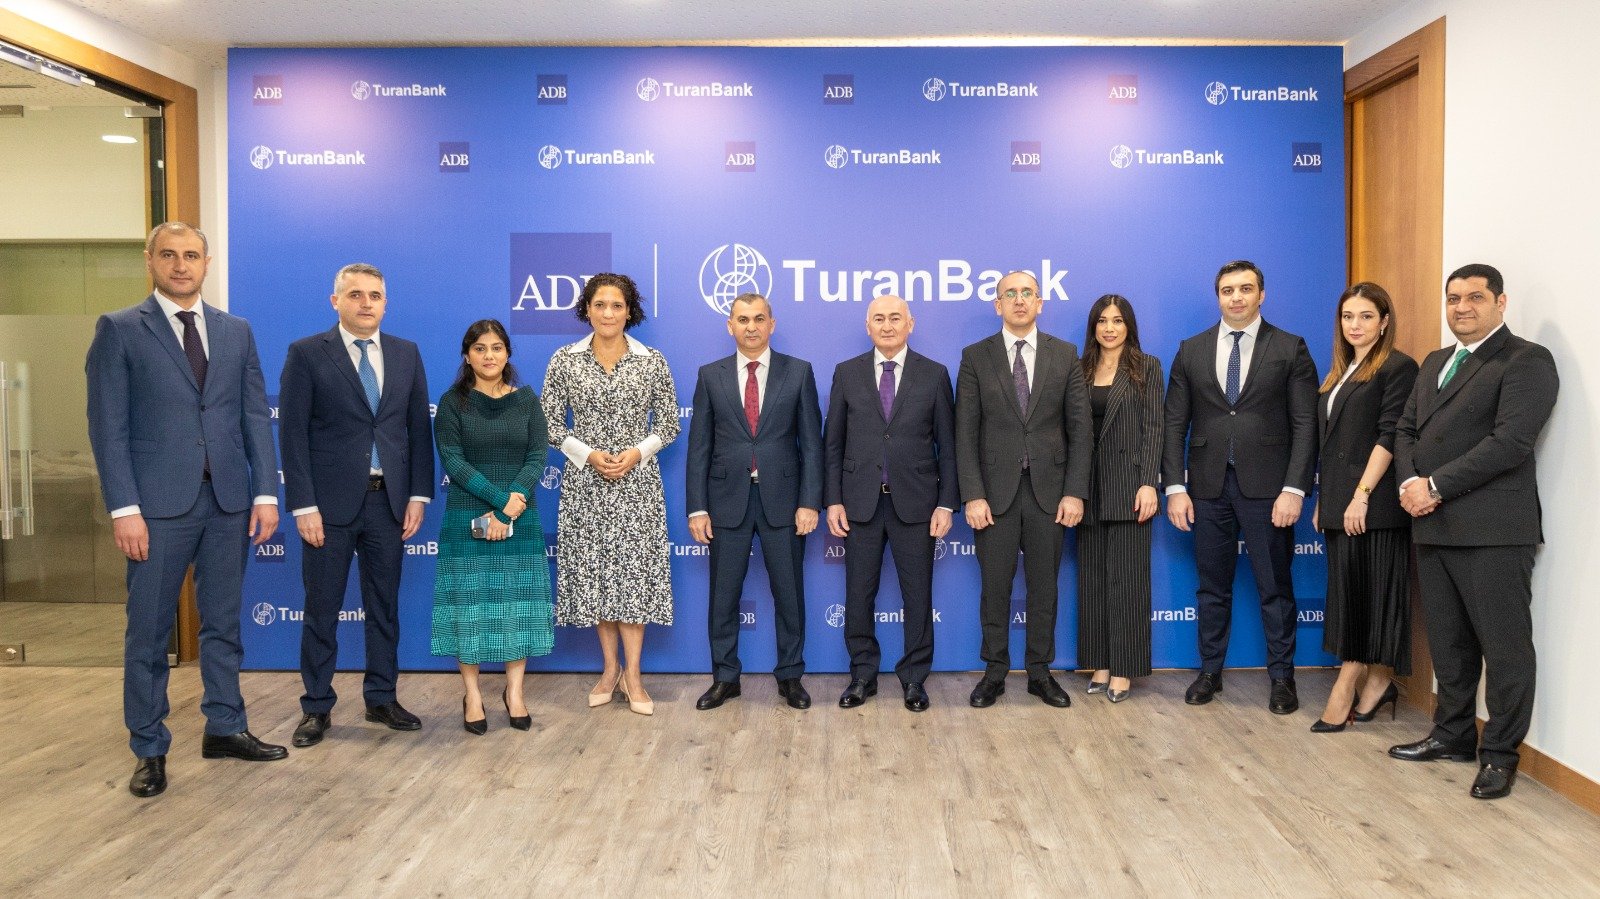 A trade financing agreement was concluded between TuranBank and Asian Development Bank (PHOTO)